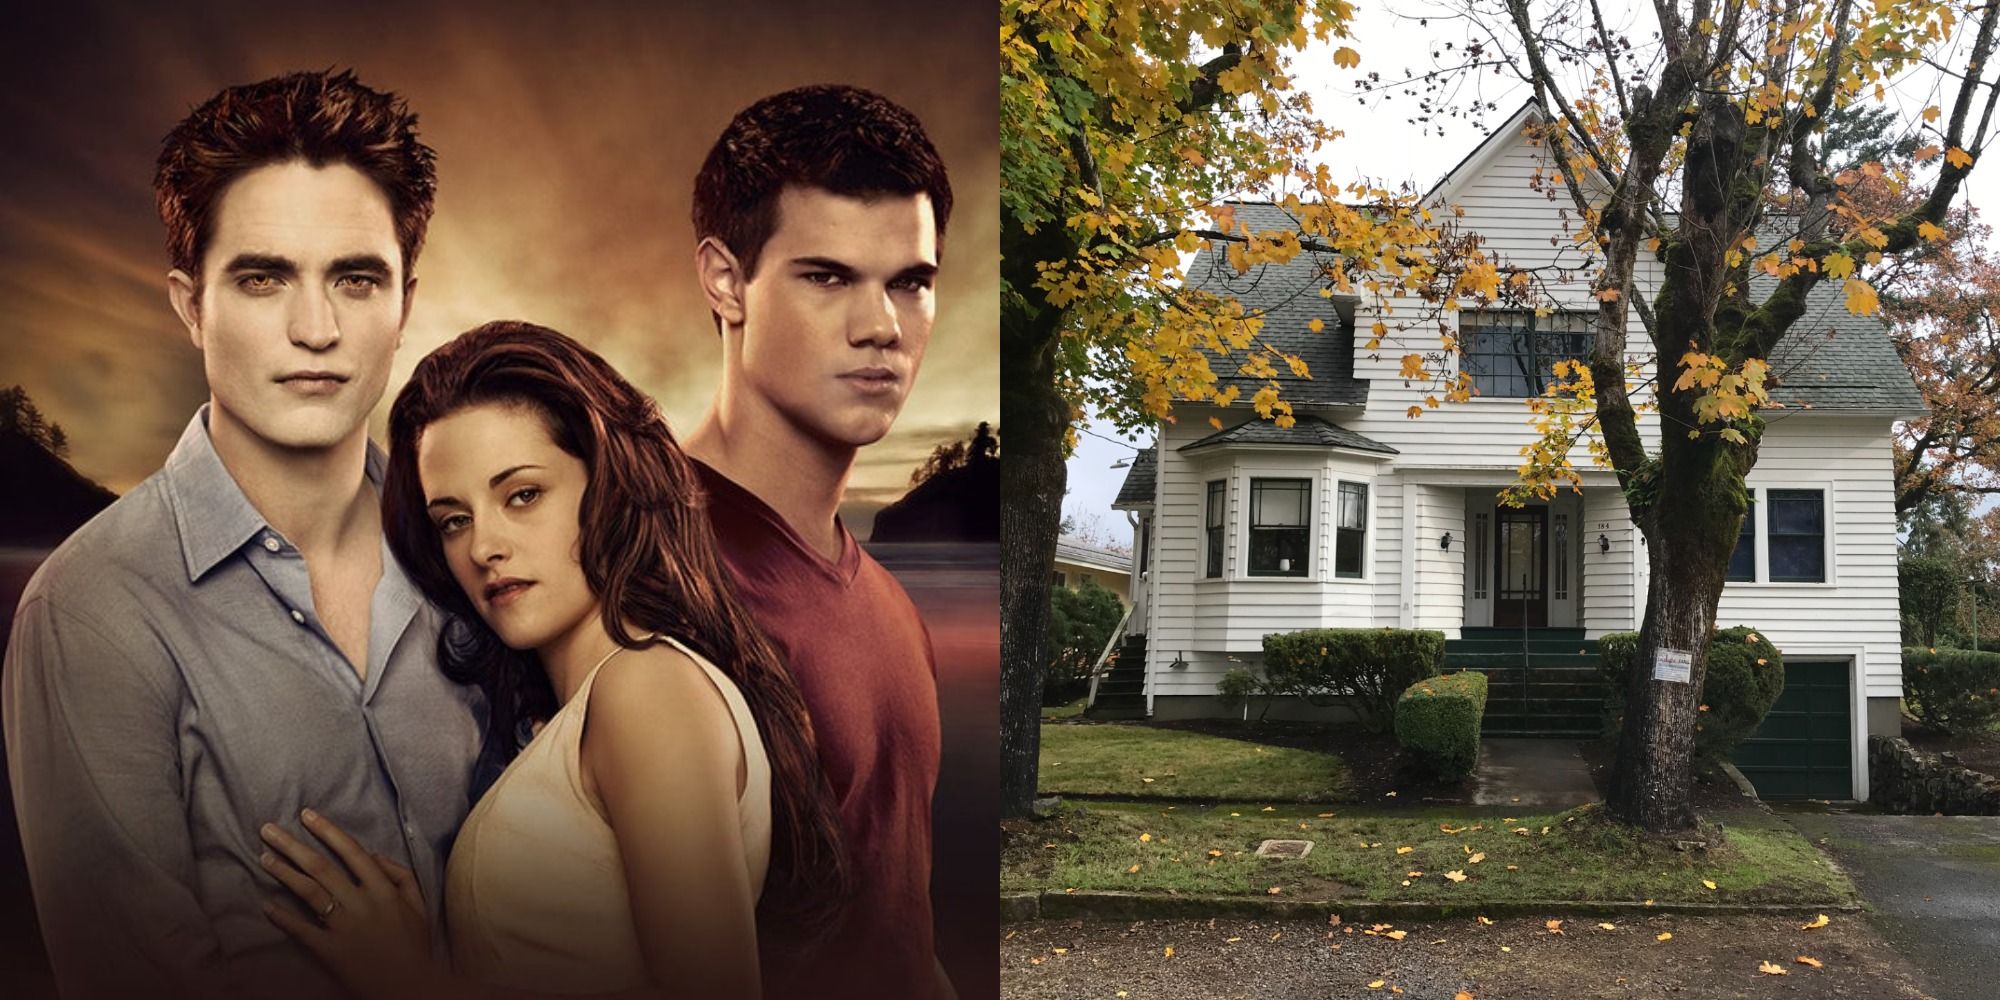 Split image of the main characters from the Twilight Saga, and the exterior of Bella Swann's house